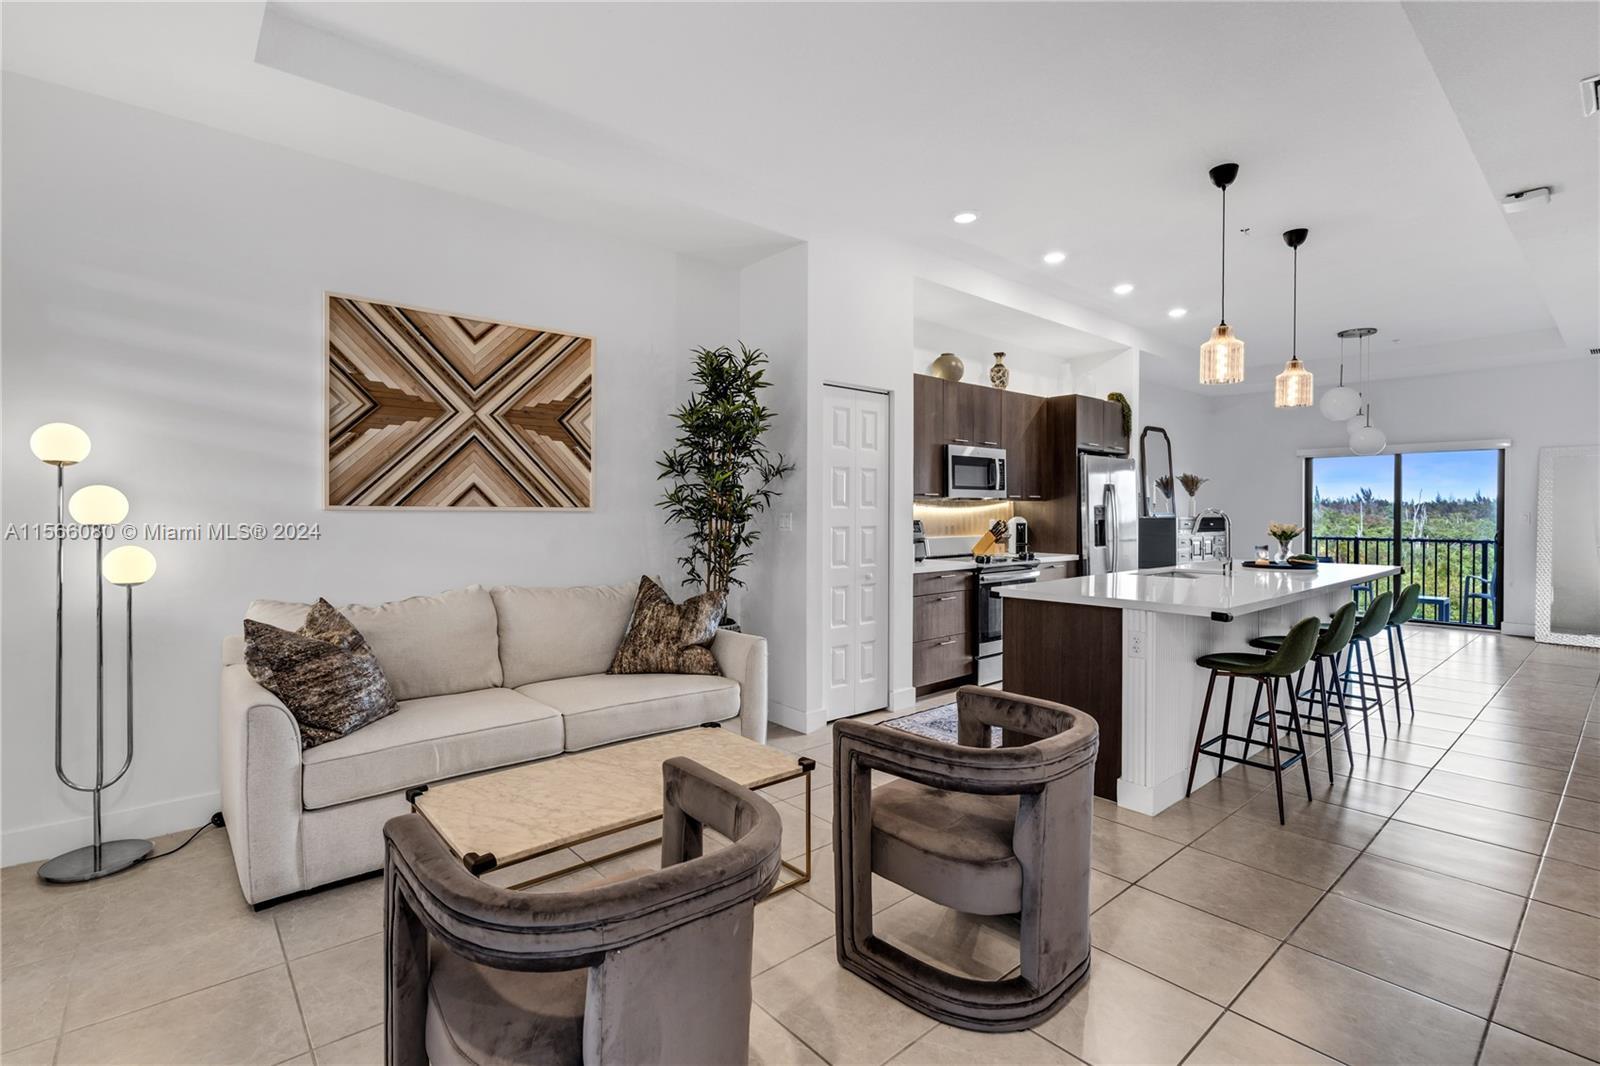 "Luxury apartment in Apex Doral! This modern apartment, located on the third floor of the building w